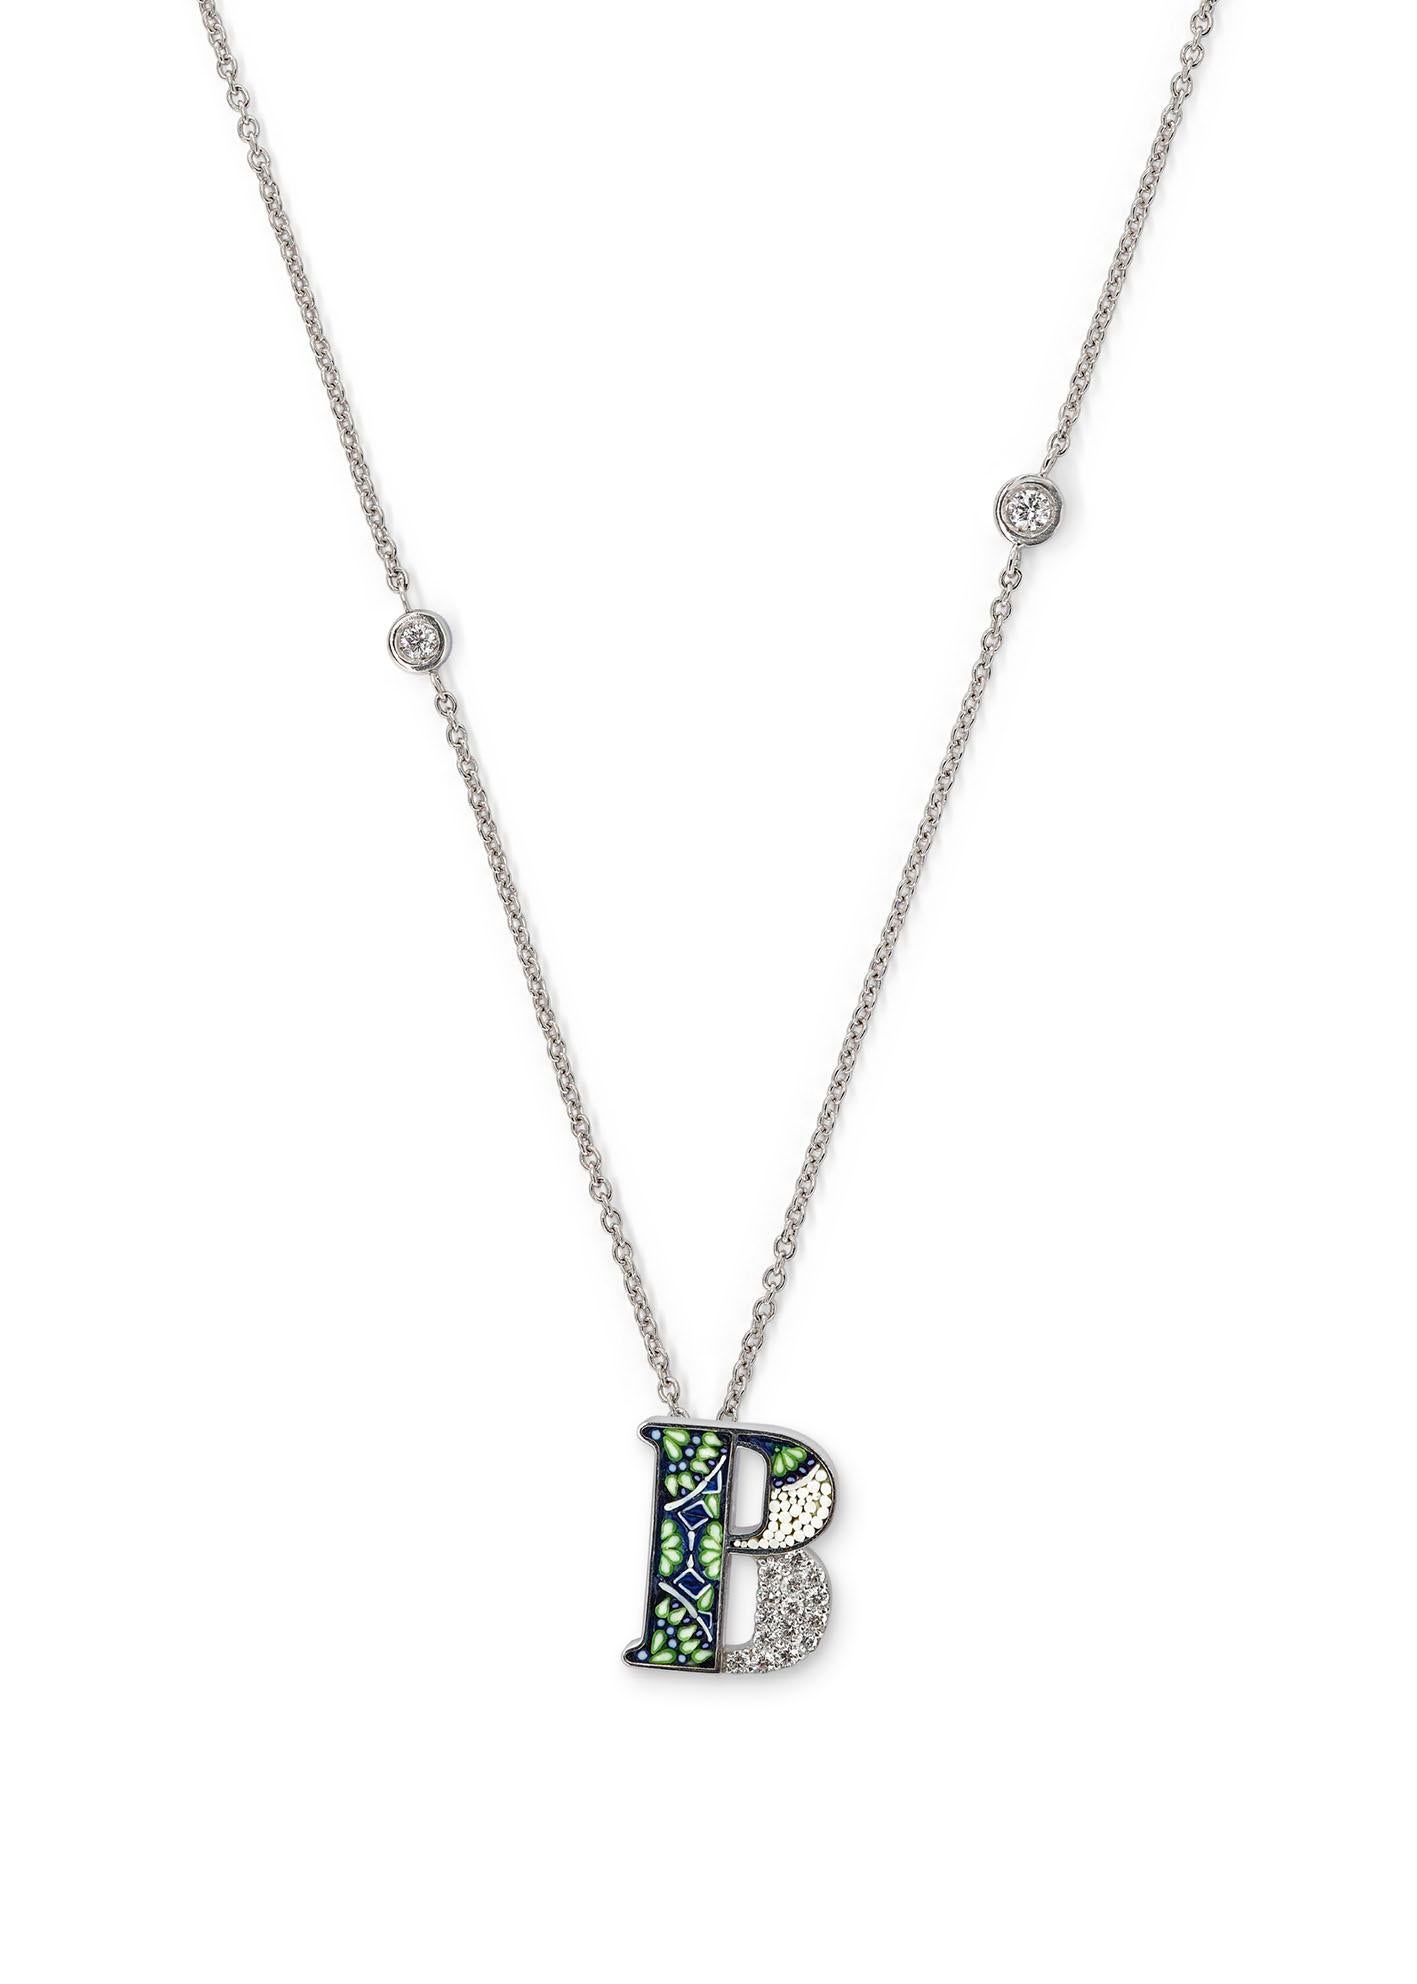 Contemporary Necklace Letter B White Gold White Diamonds Hand Decorated with Micromosaic For Sale